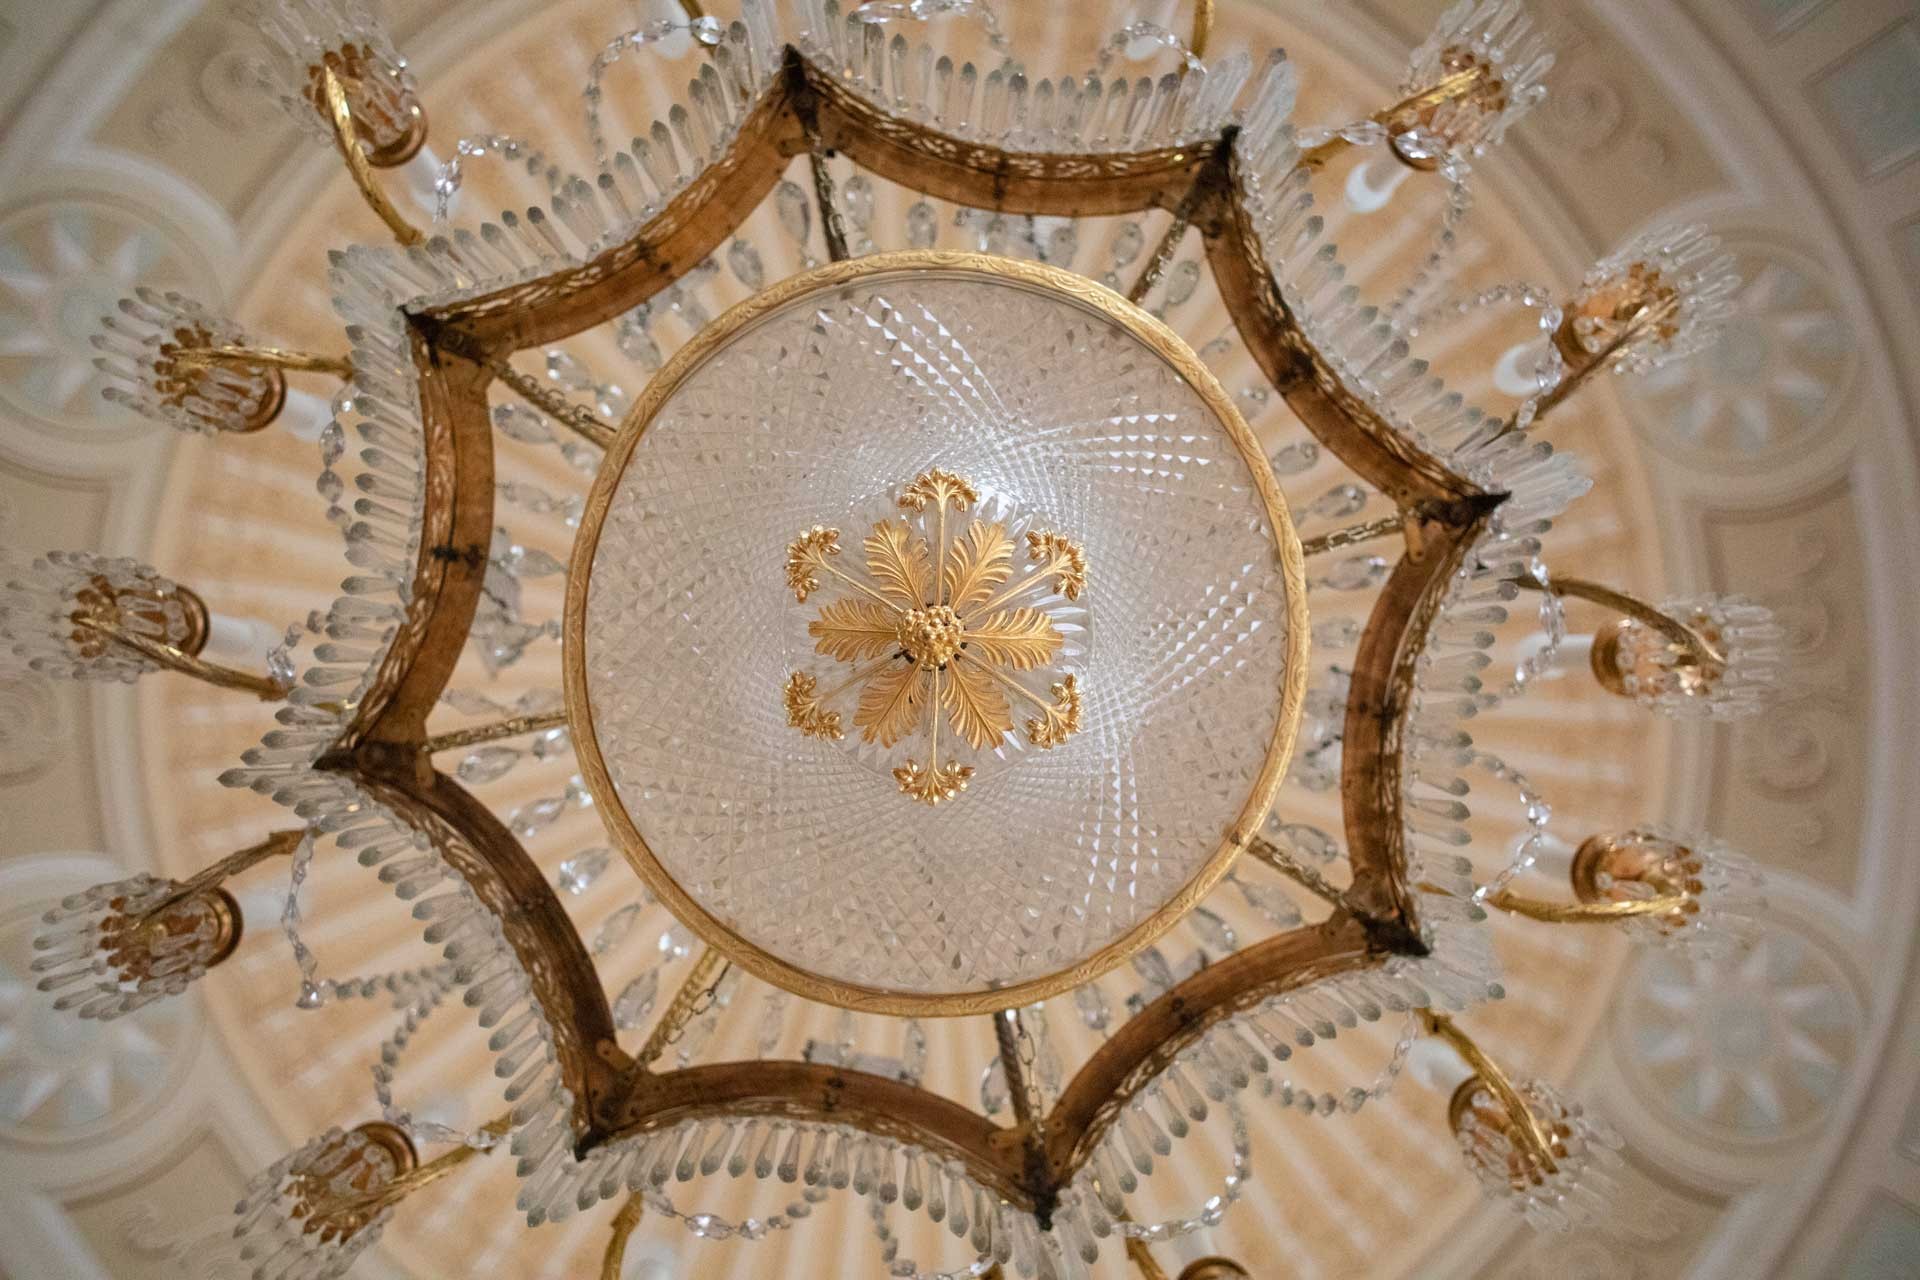 Chandelier photographed from below